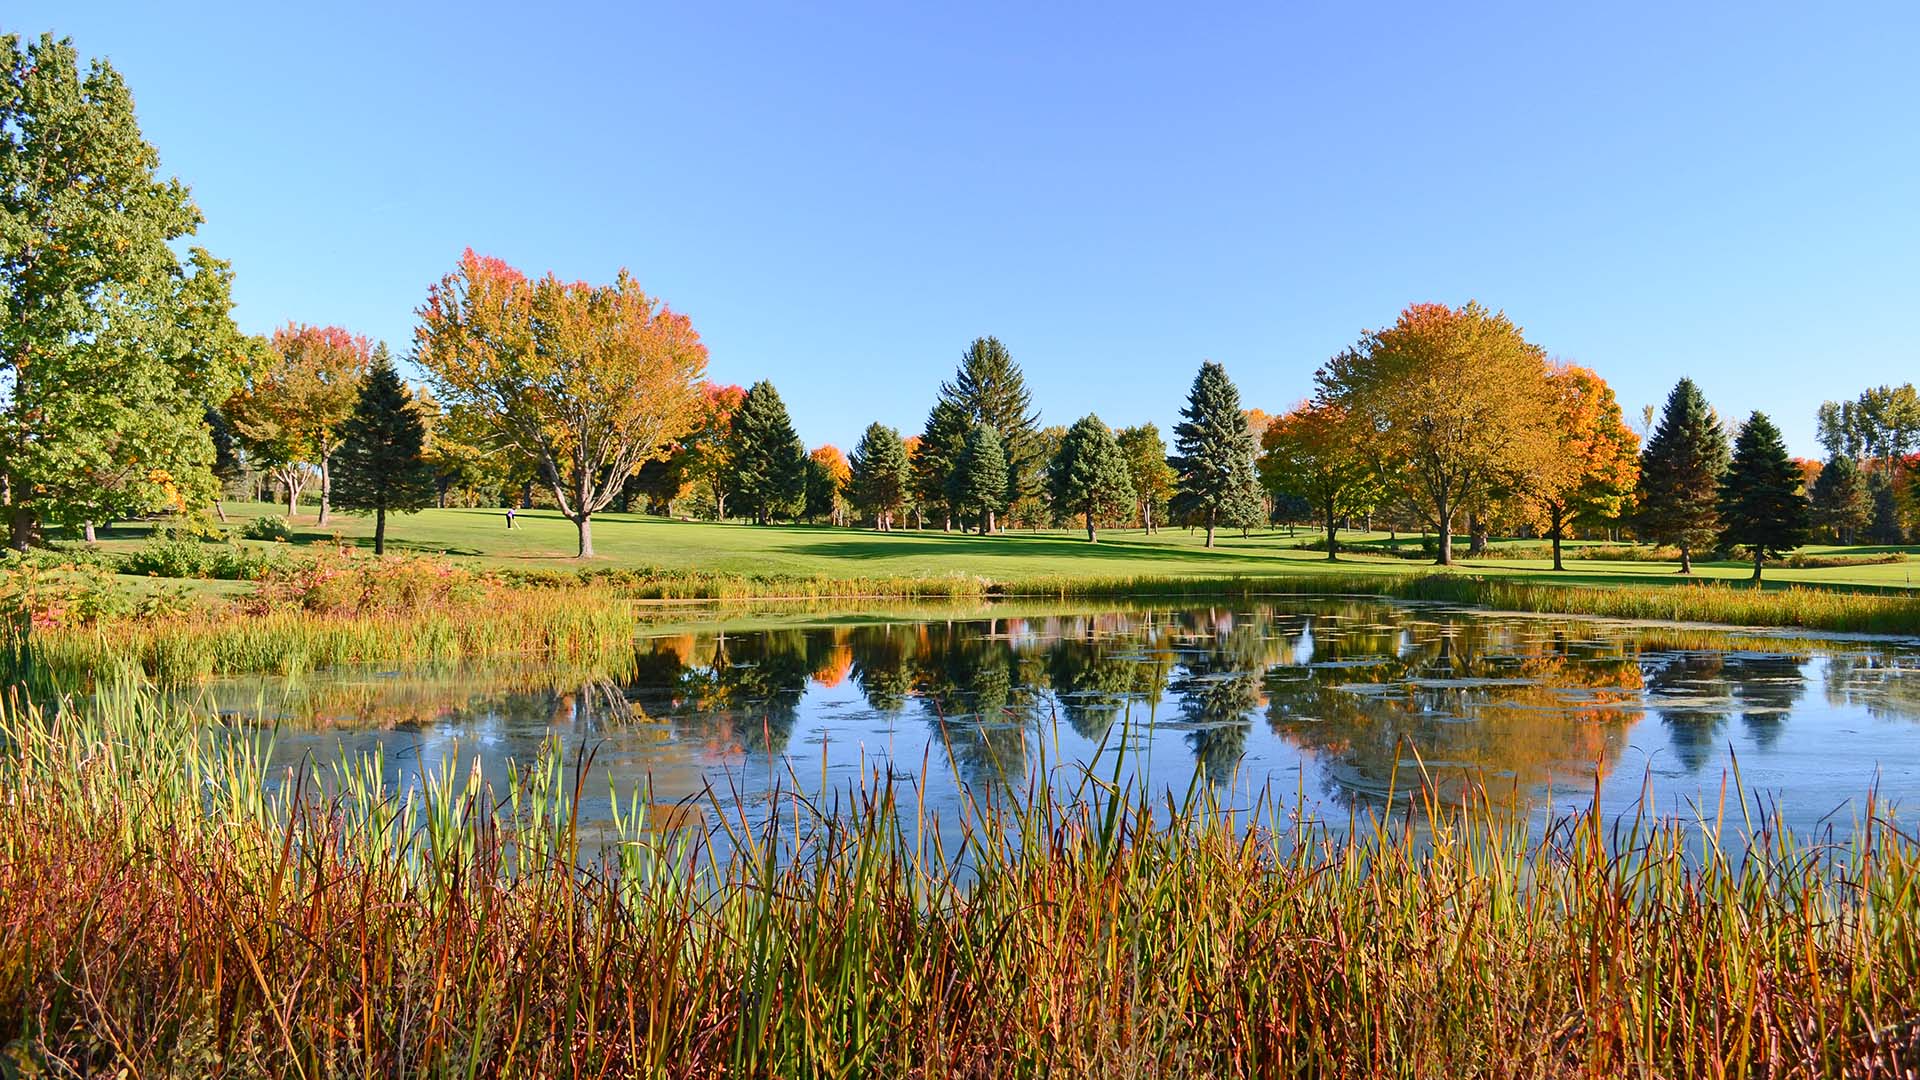 Seven scenic golf courses to play this fall in Southwest Michigan